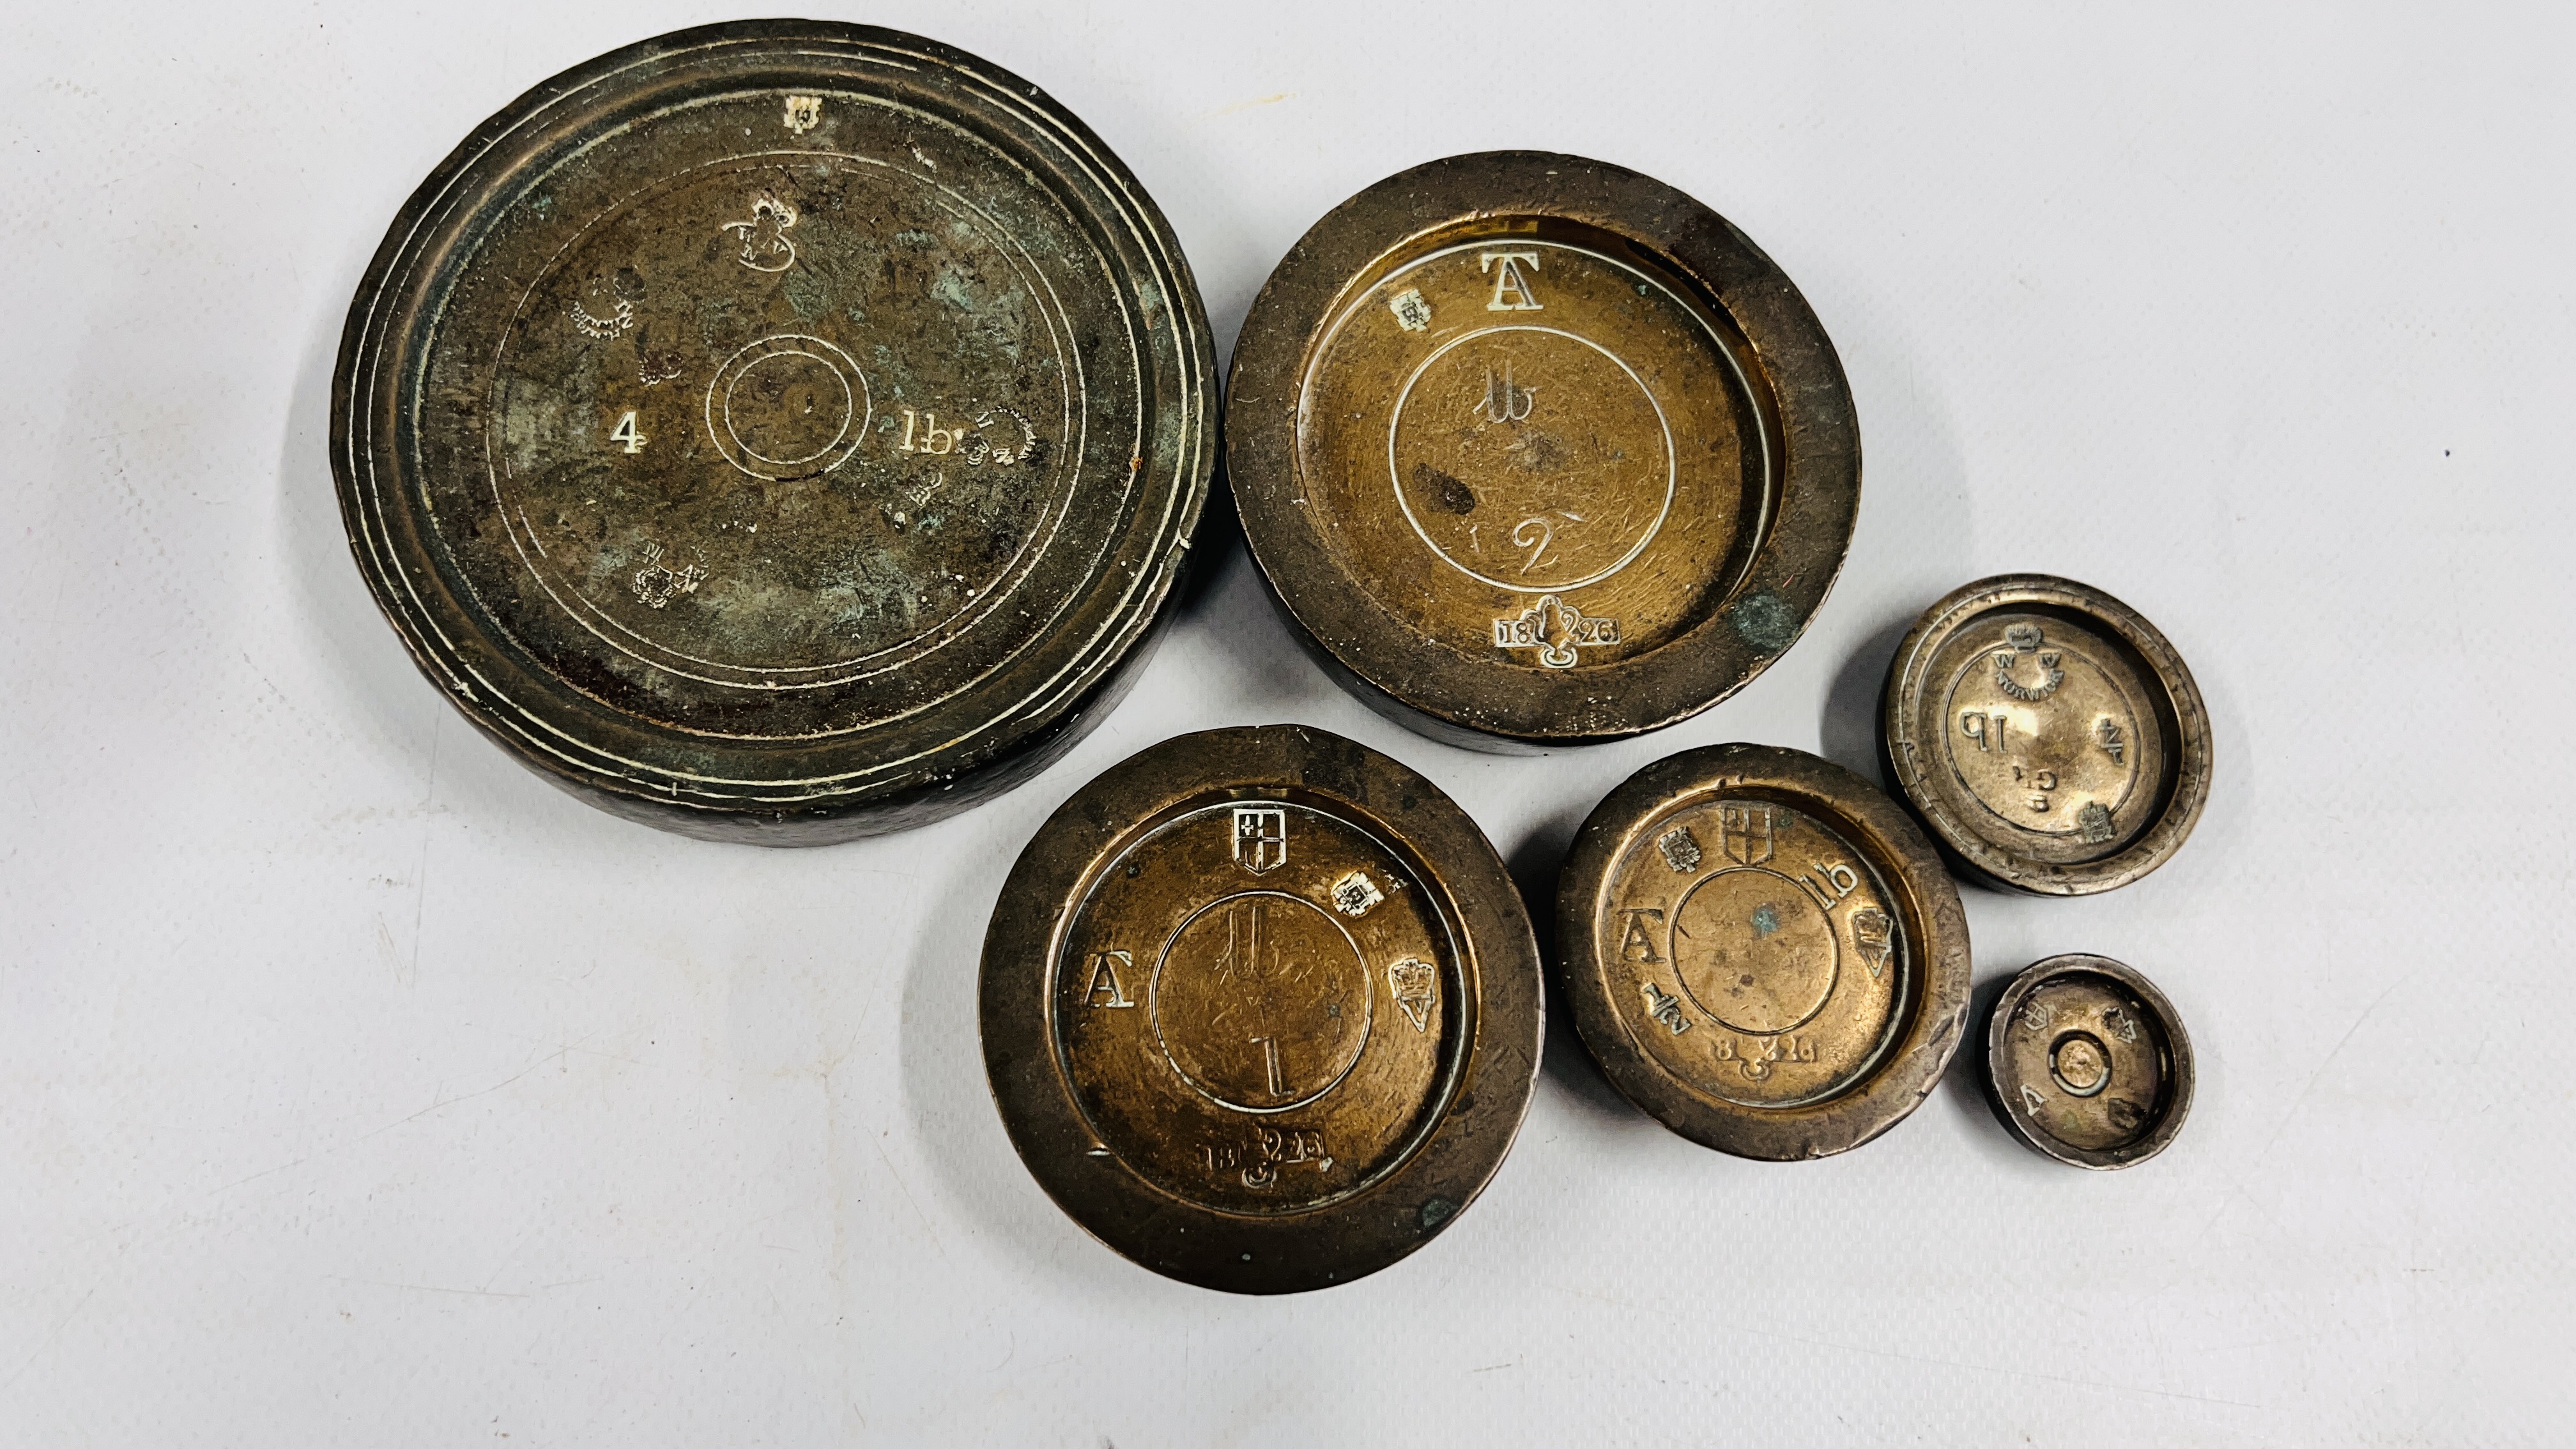 A GROUP OF 6 VINTAGE GRADUATED WEIGHTS OF LOCAL INTEREST ALONG WITH A CAST MORTAR. - Image 7 of 11